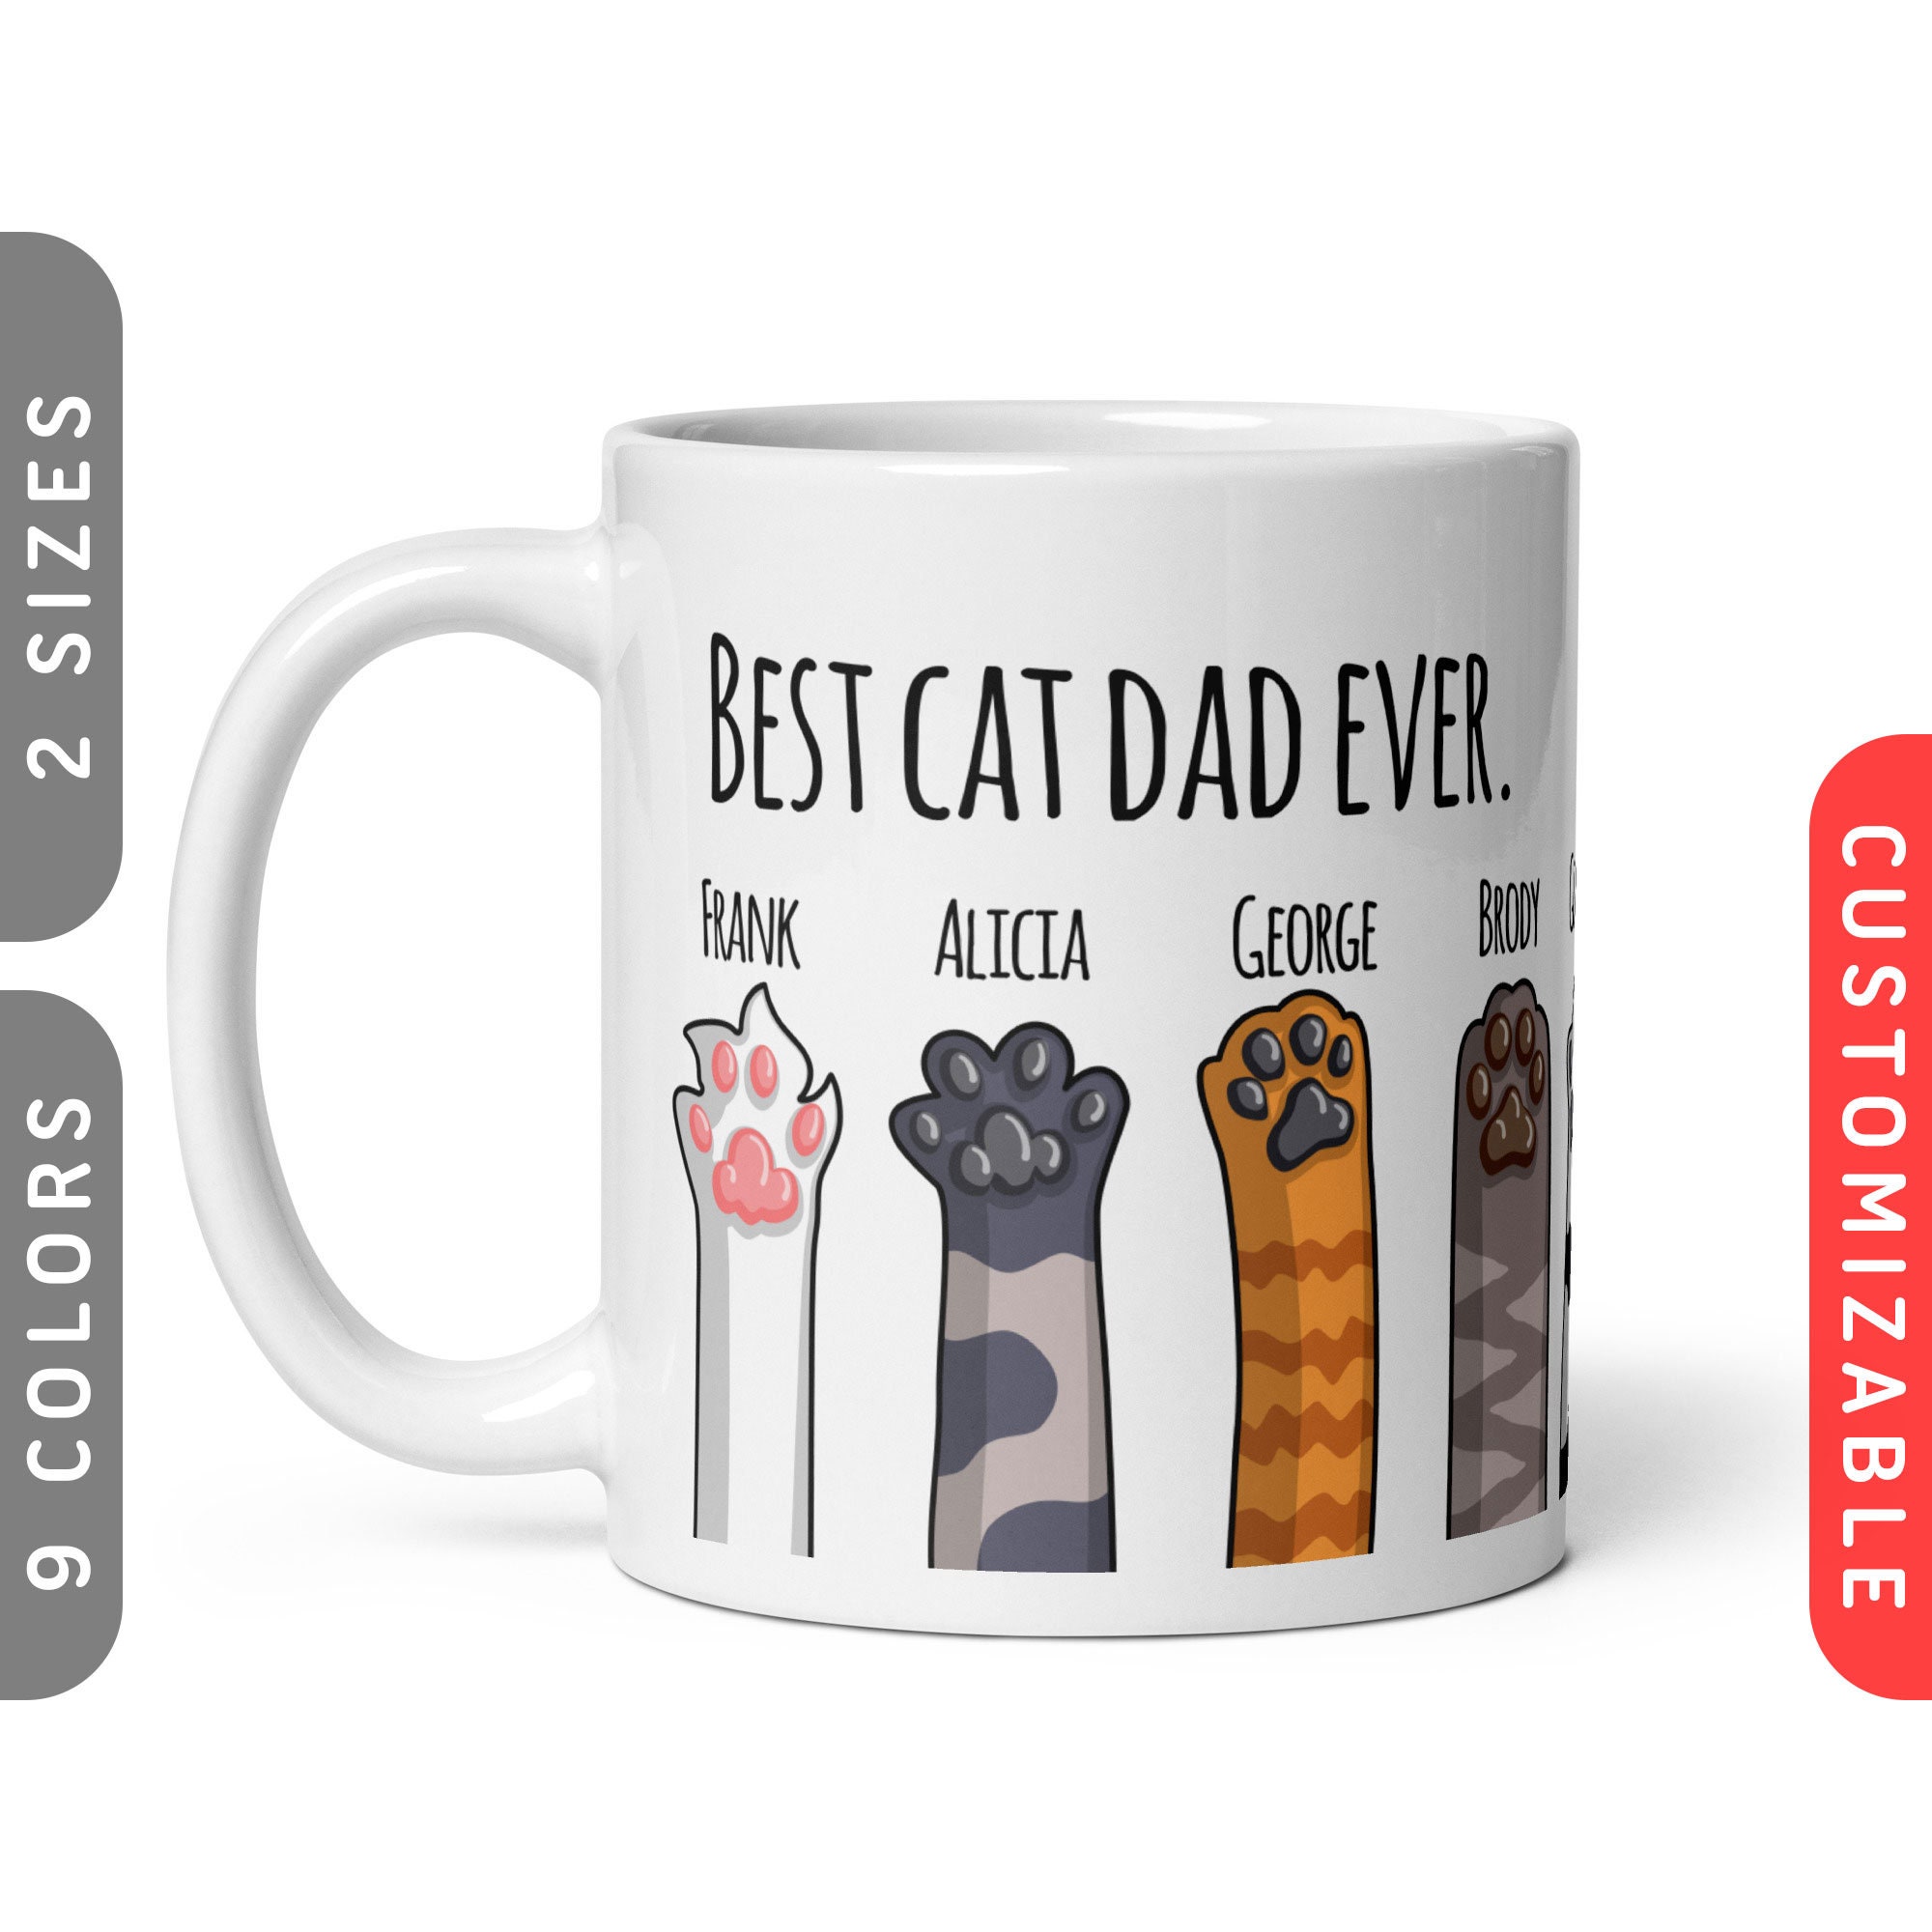 Cat Paw Cup，Cat claw Cup Milk Glass Frosted Glass Cup Cute Cat Foot Claw  Print Mug Cat Paw for Coffee Kids Milk Glass Cups Tumbler Personality  Breakfast Milk Cup 